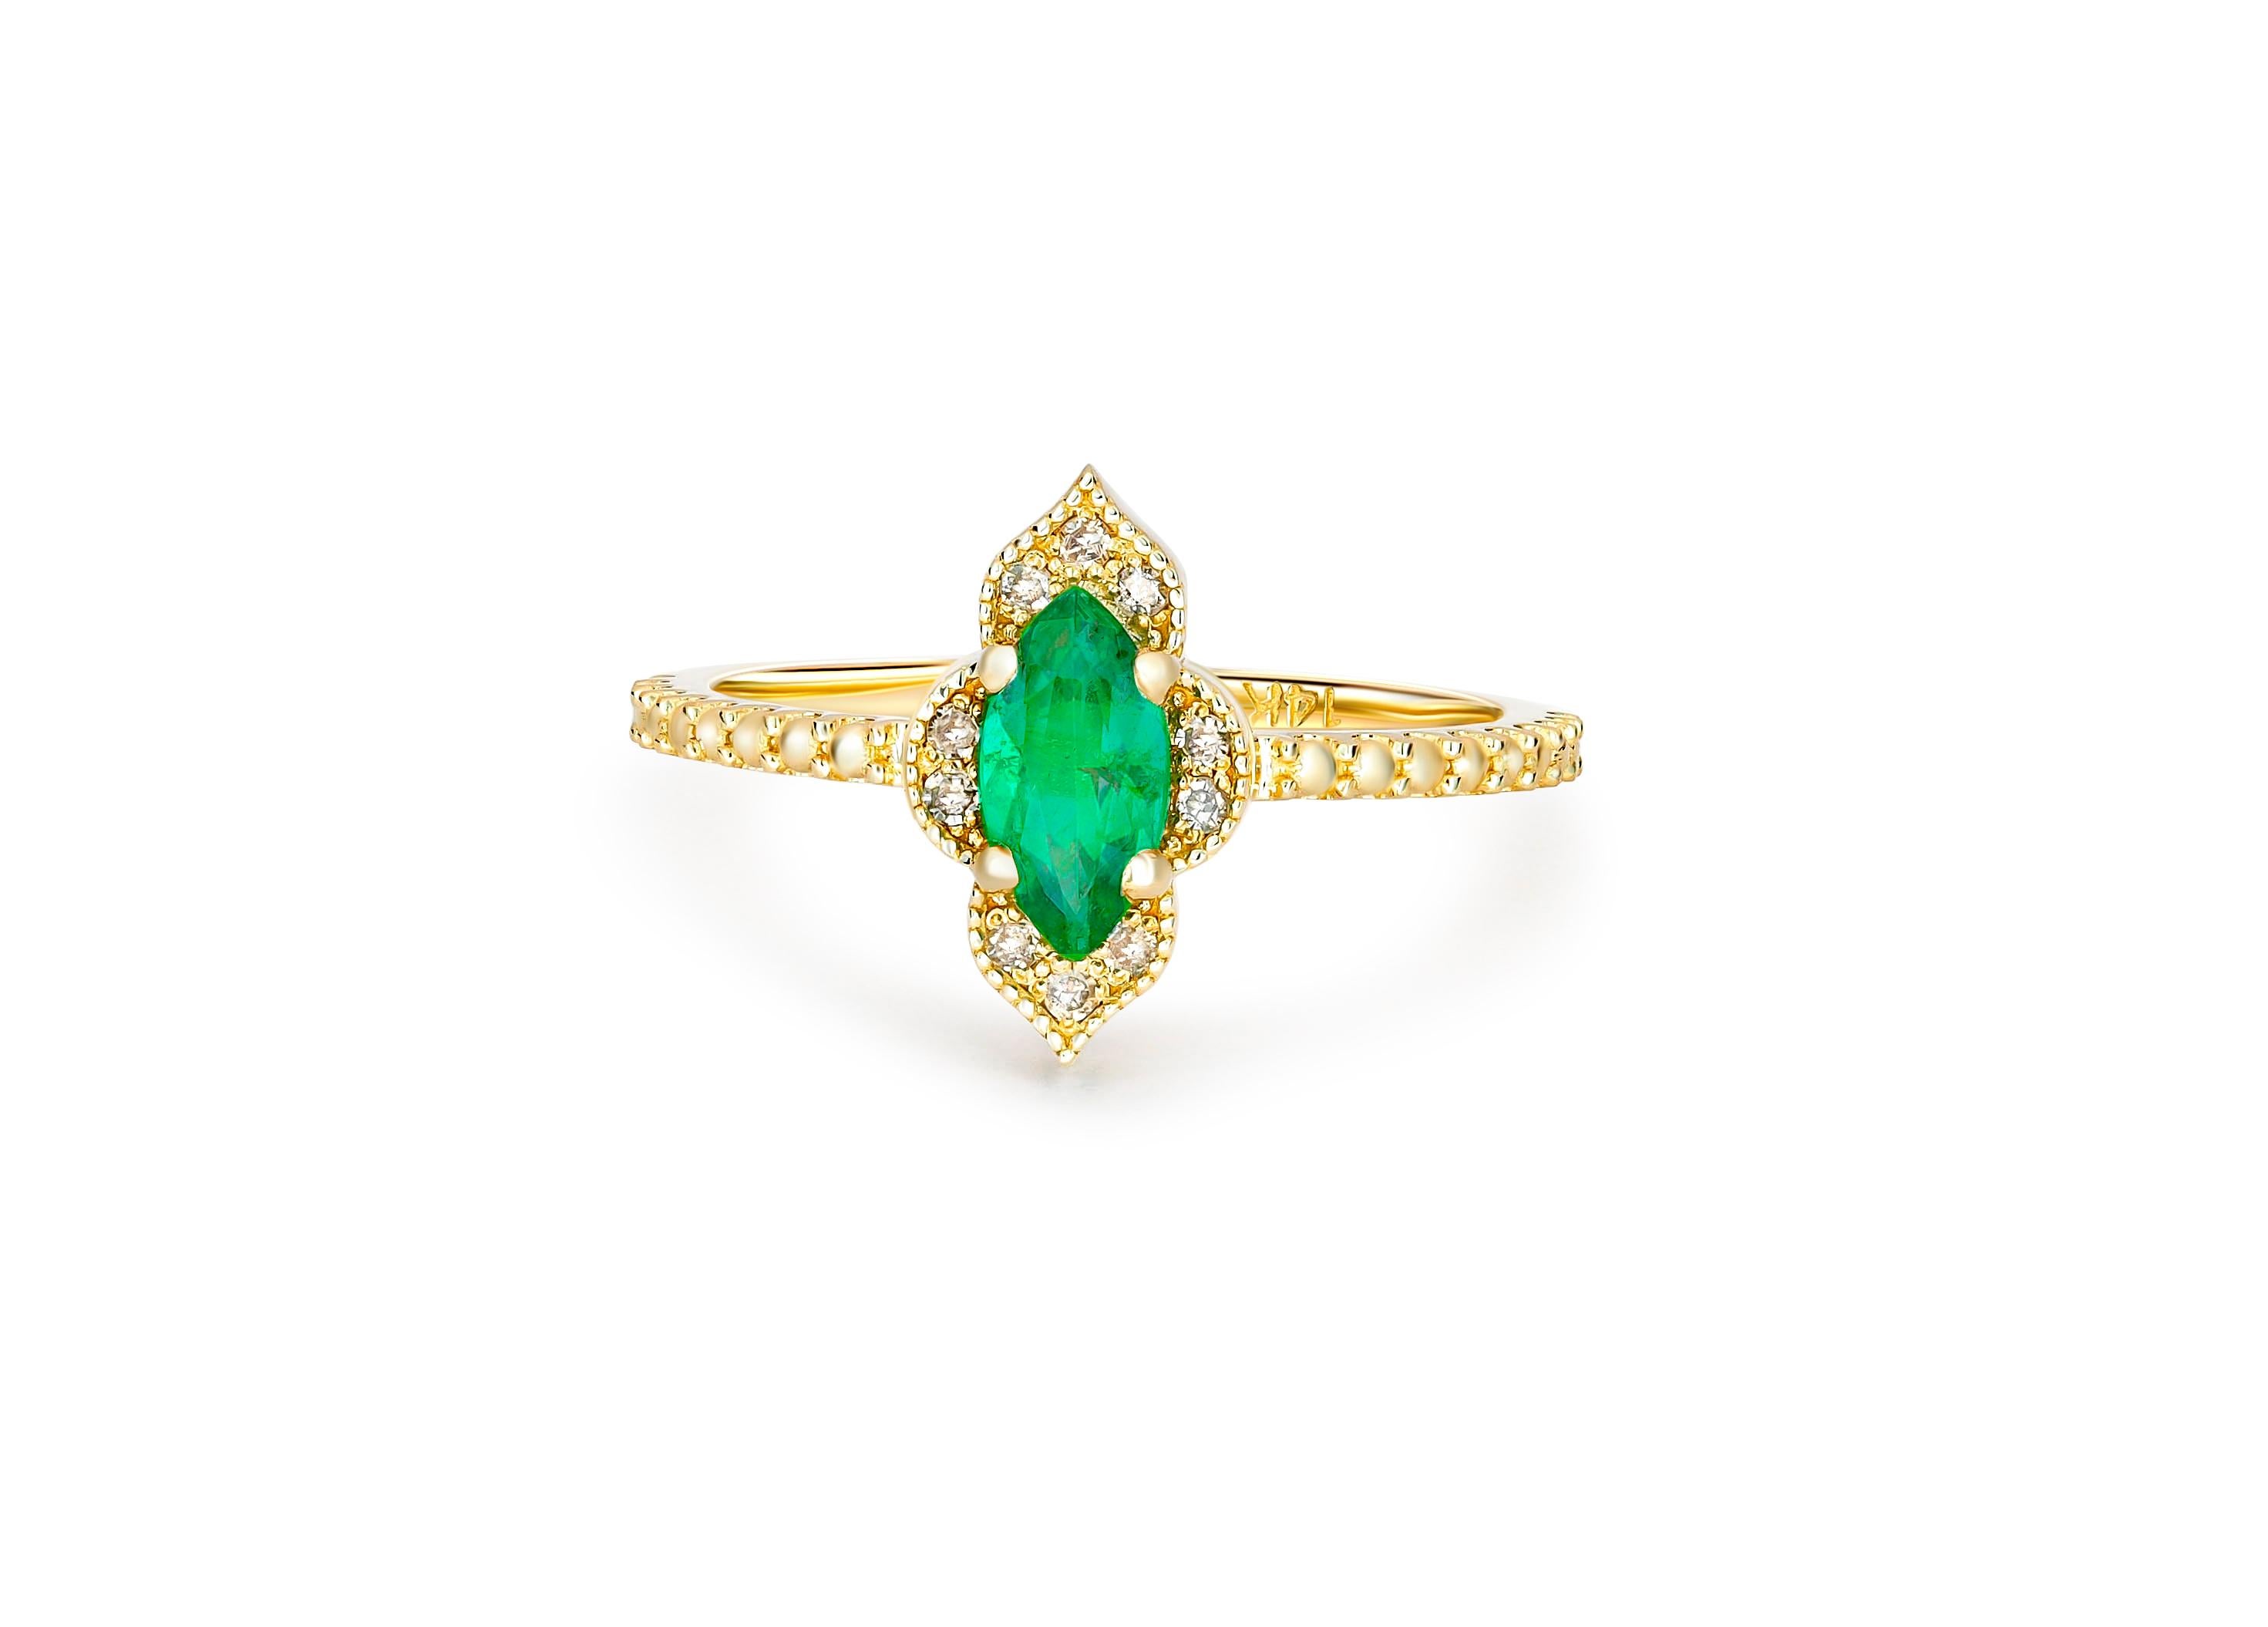 Emerald 14k gold ring. 
Marquise Emerald Ring. May Birthstone Ring. Emerald ring vintage. Statement gold ring. Casual emerald ring.

Metal: 14k gold
Weight: 2.02 g. depends from size.

Set with emerald, color - green
Marquise cut, aprox 0.70 ct. in